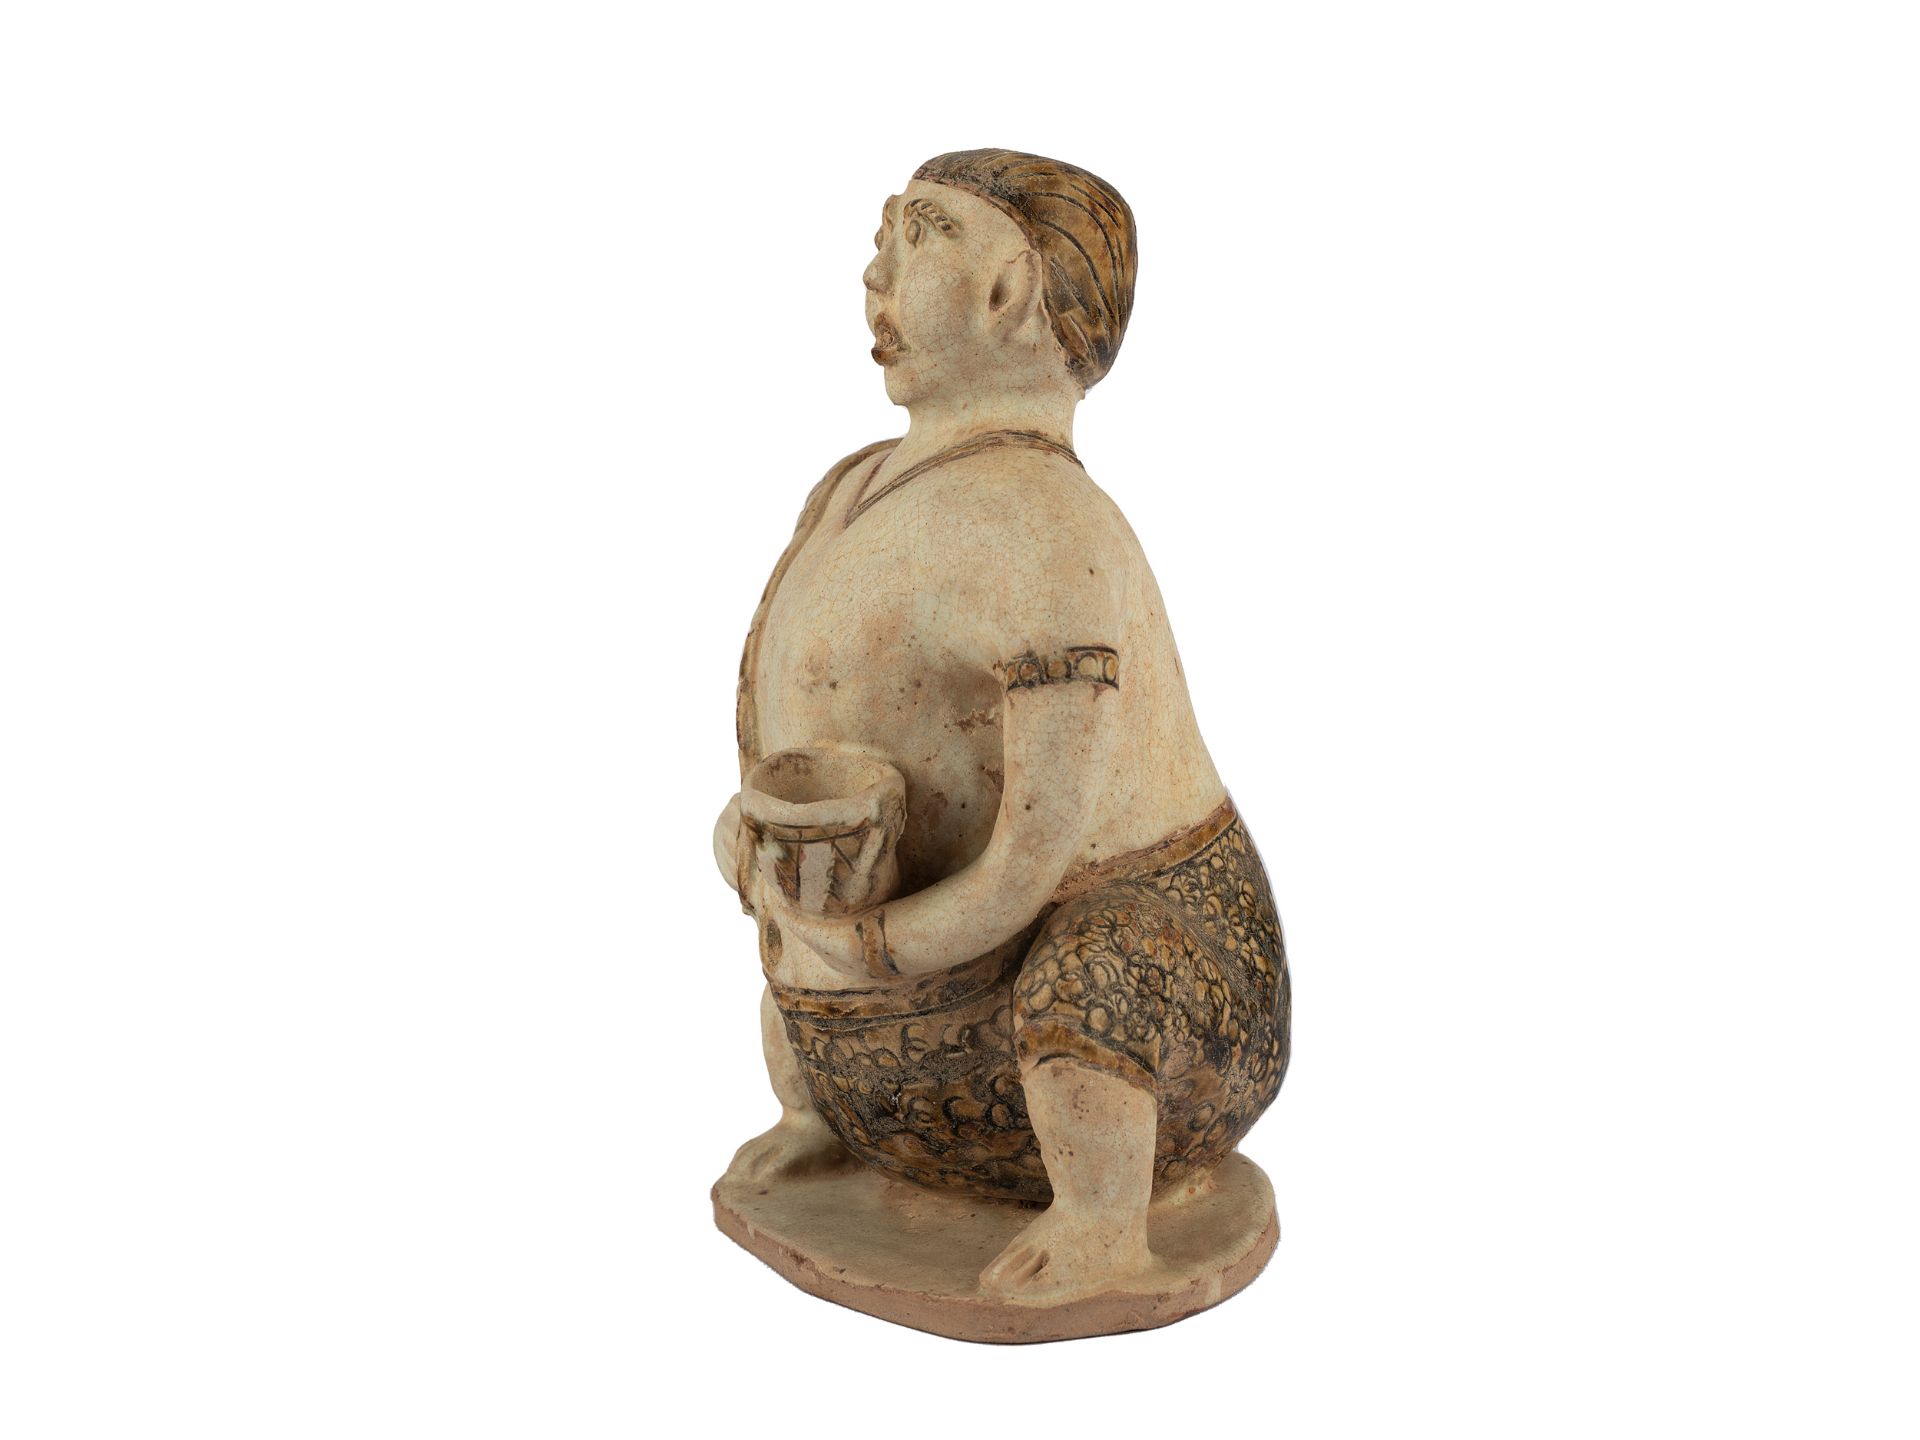 Water dropper in the shape of a hunchback, Thailand, In the Sawankhalok style of the 15th-16th c. - Image 3 of 5